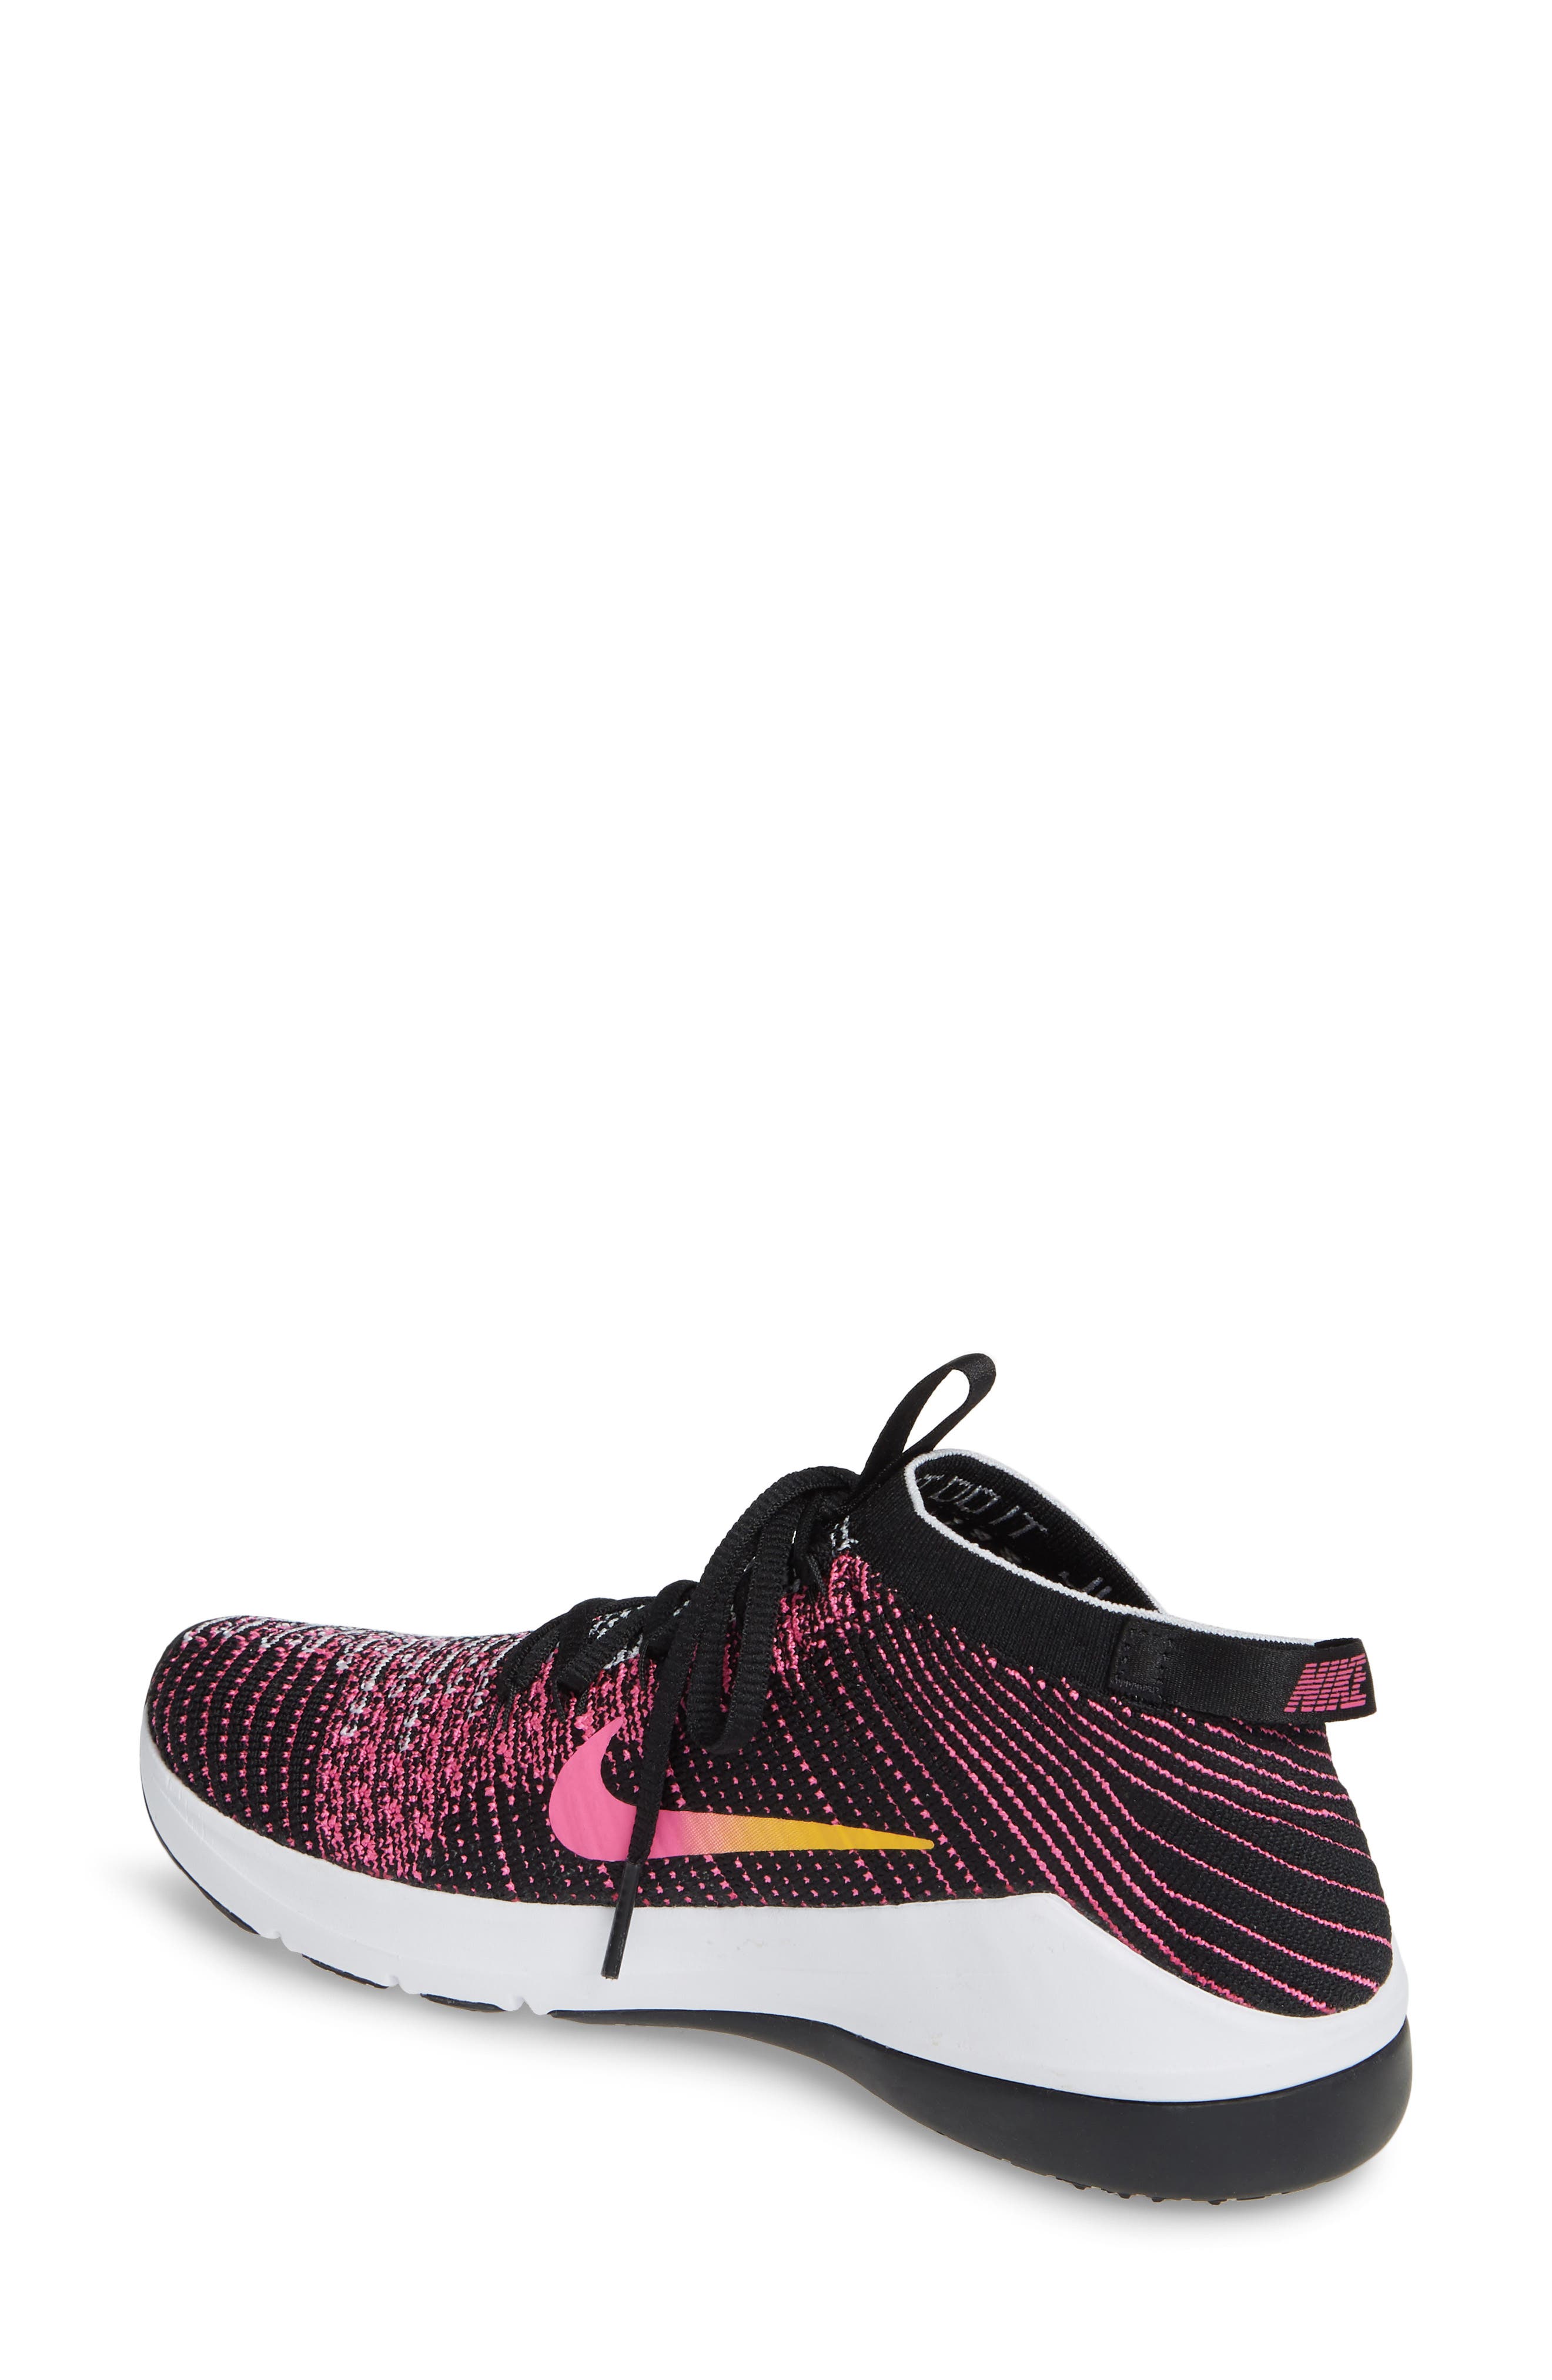 zoom air fearless flyknit 2 amp